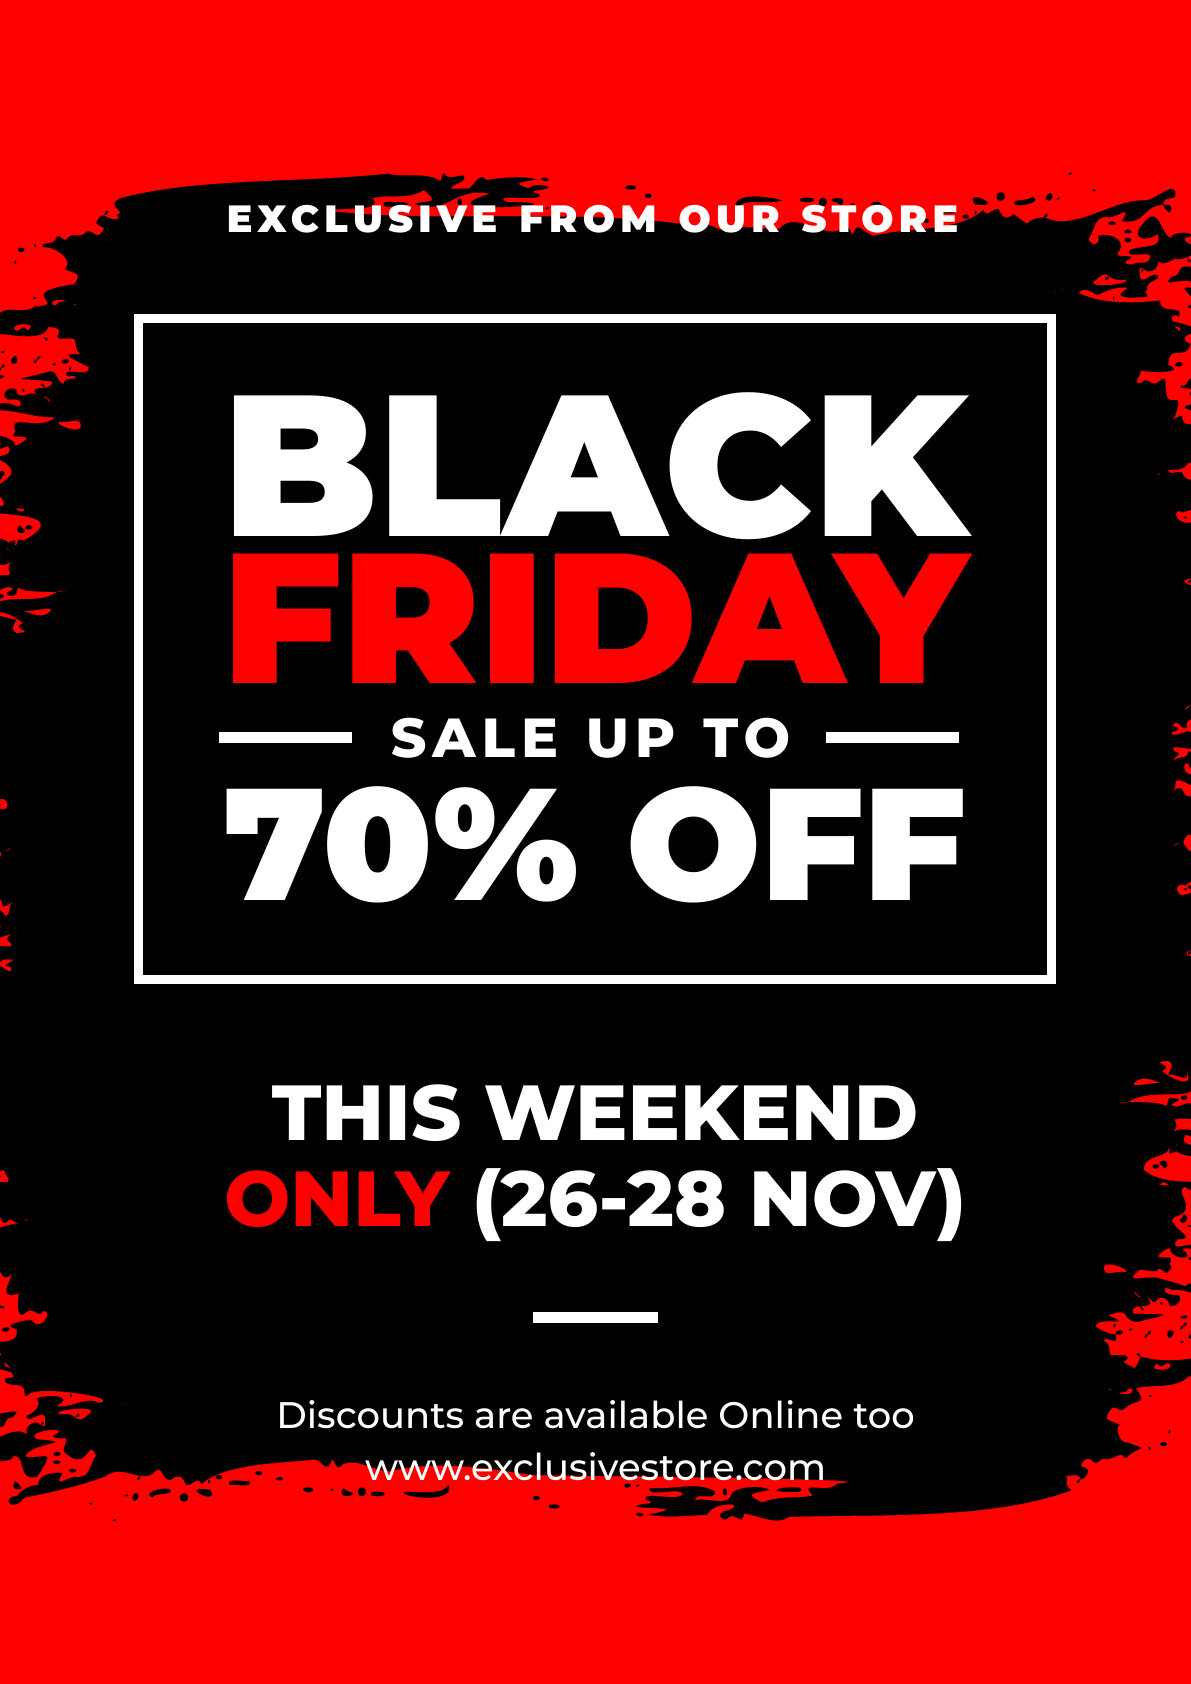 Exclusive Brushed Black Friday Poster 1191x1684